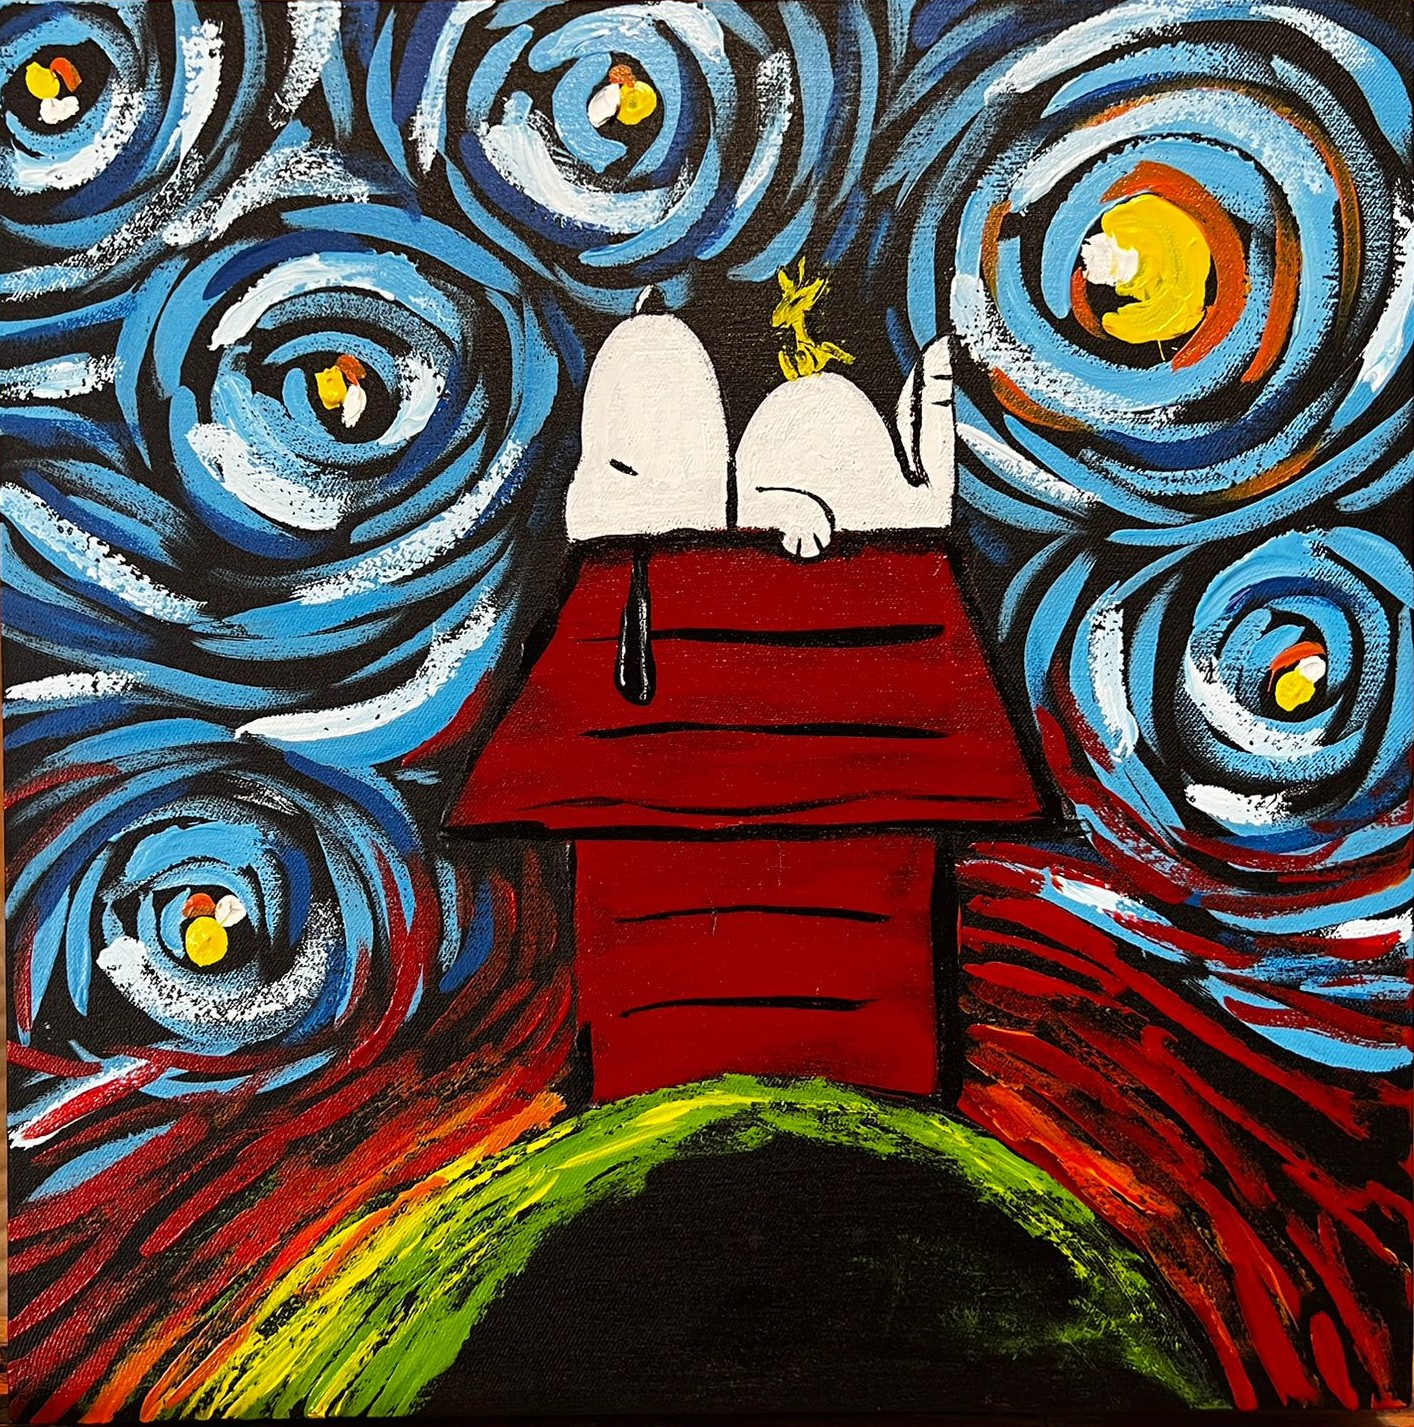 A Snoopy Gogh 2 experience project by Yaymaker